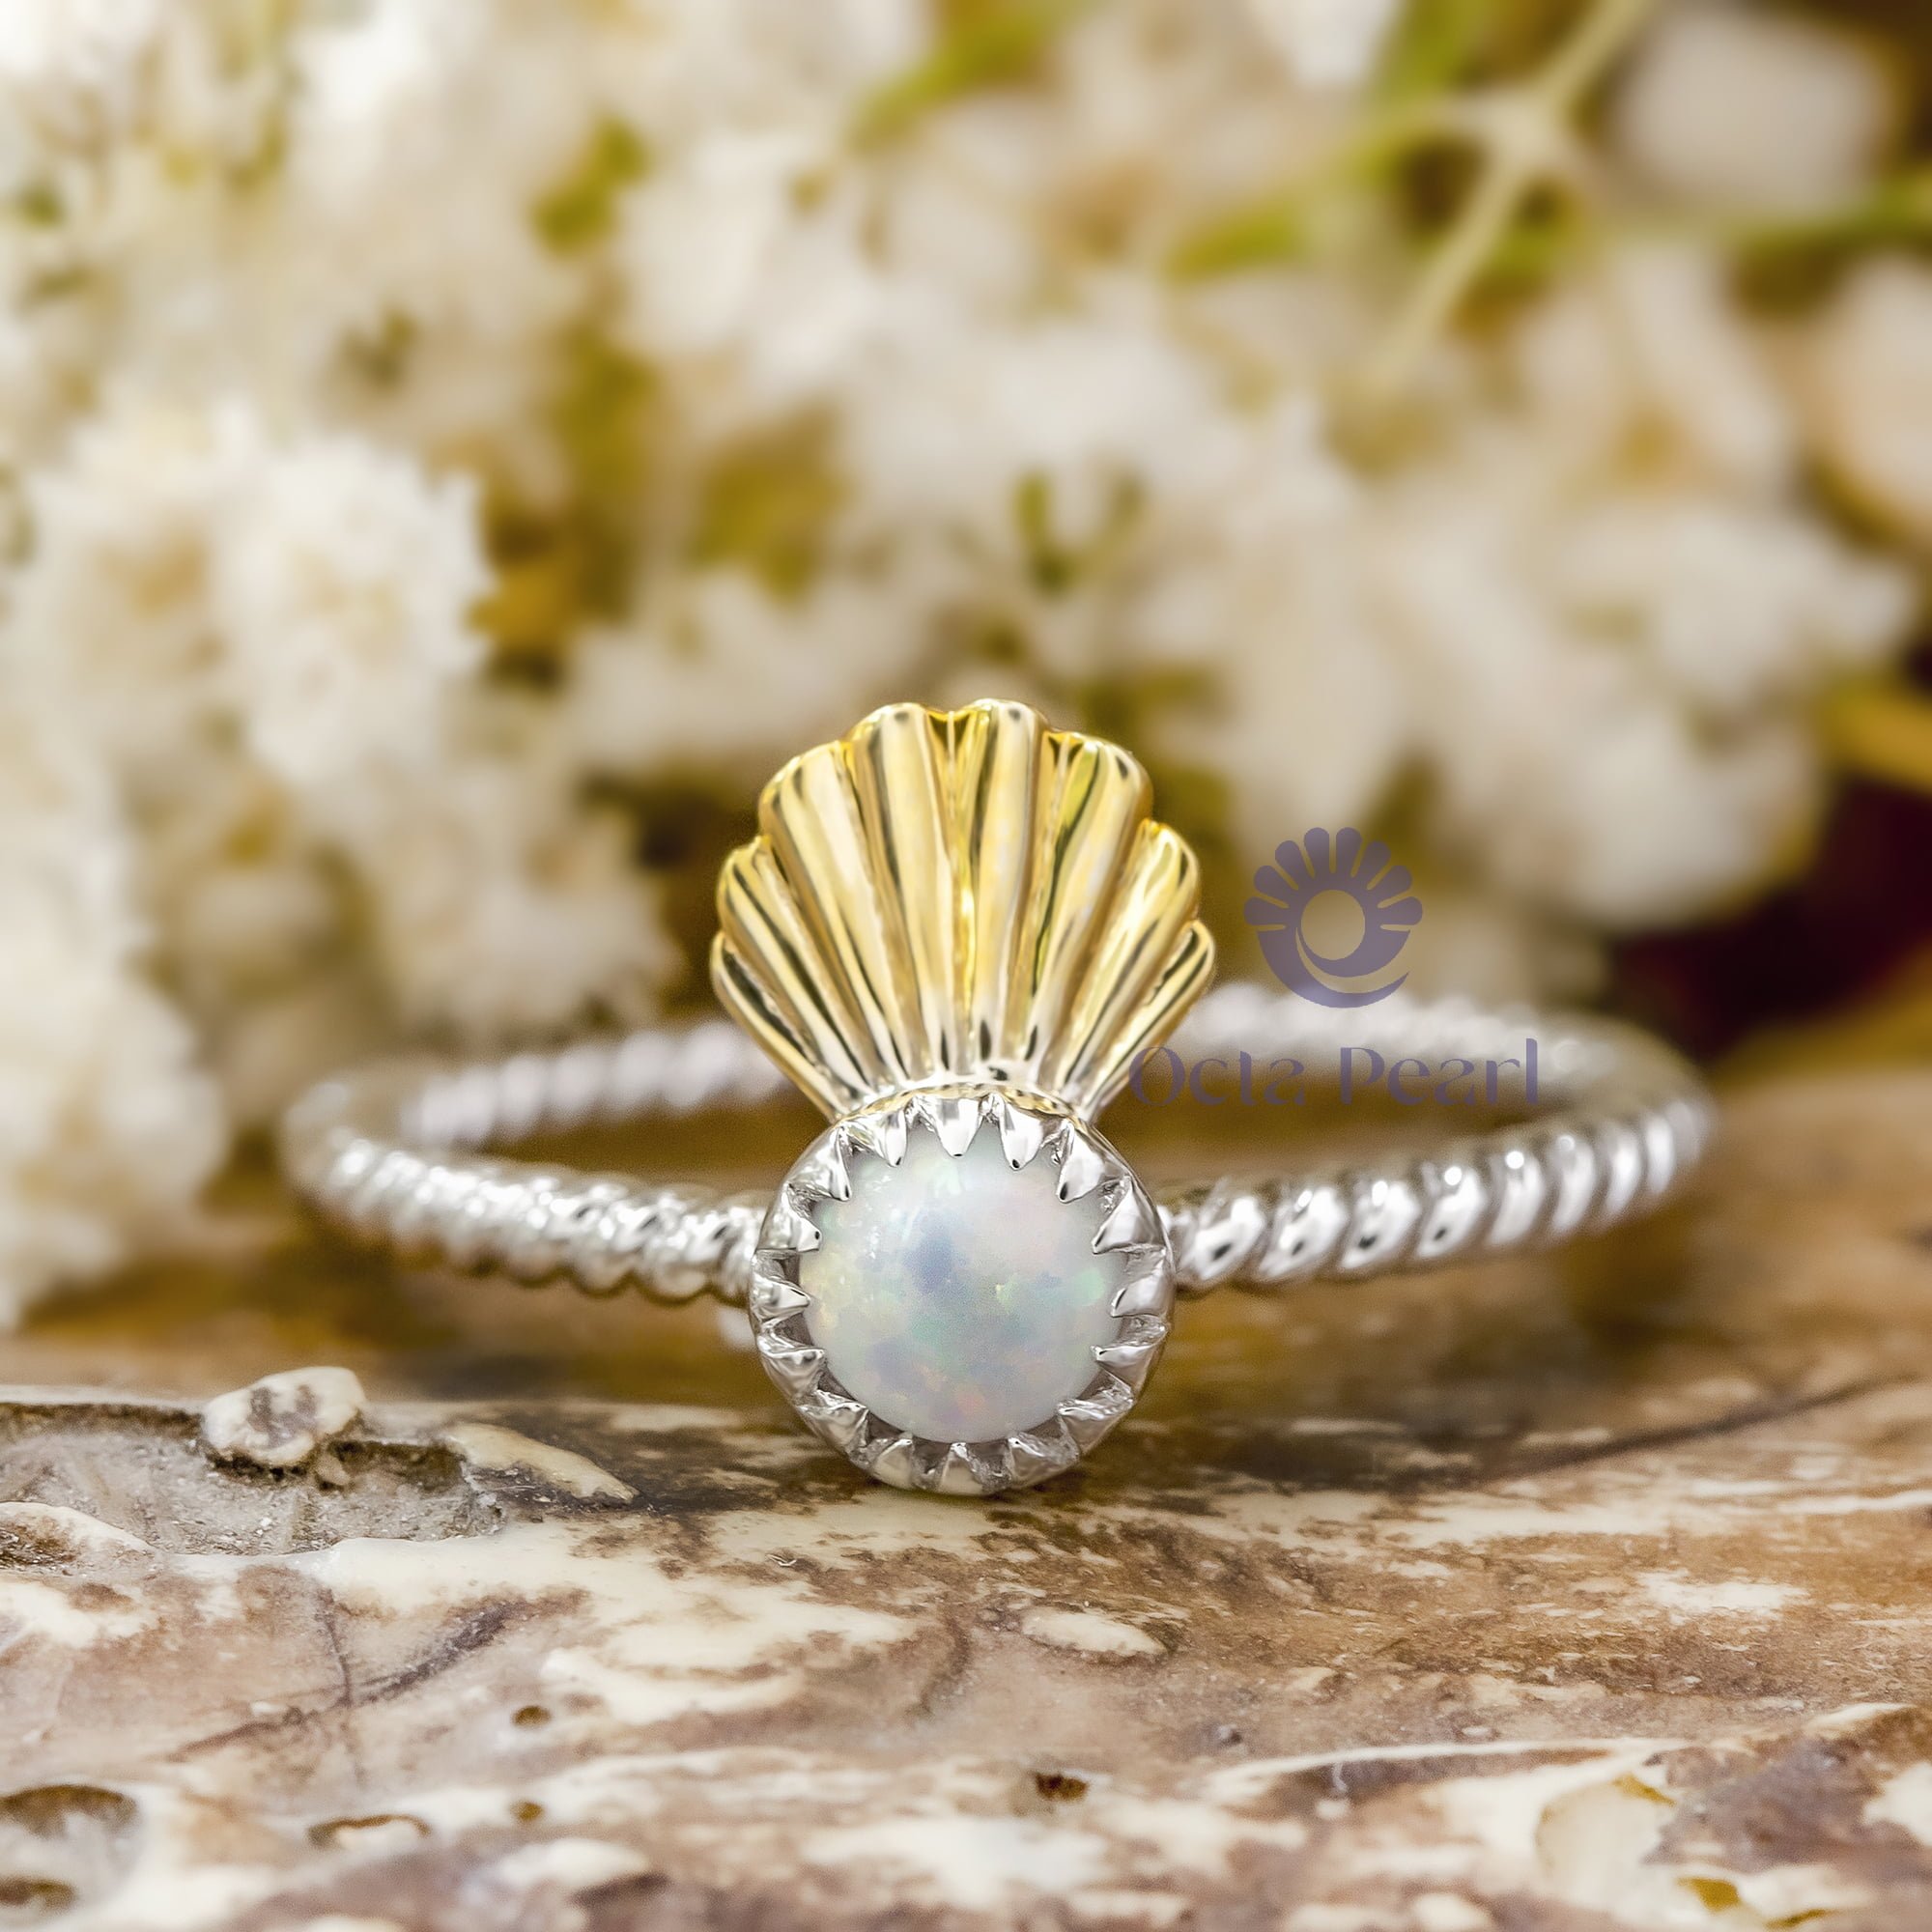 Opal Gemstone Mermaid Shell Crown Solitaire Engagement Ring